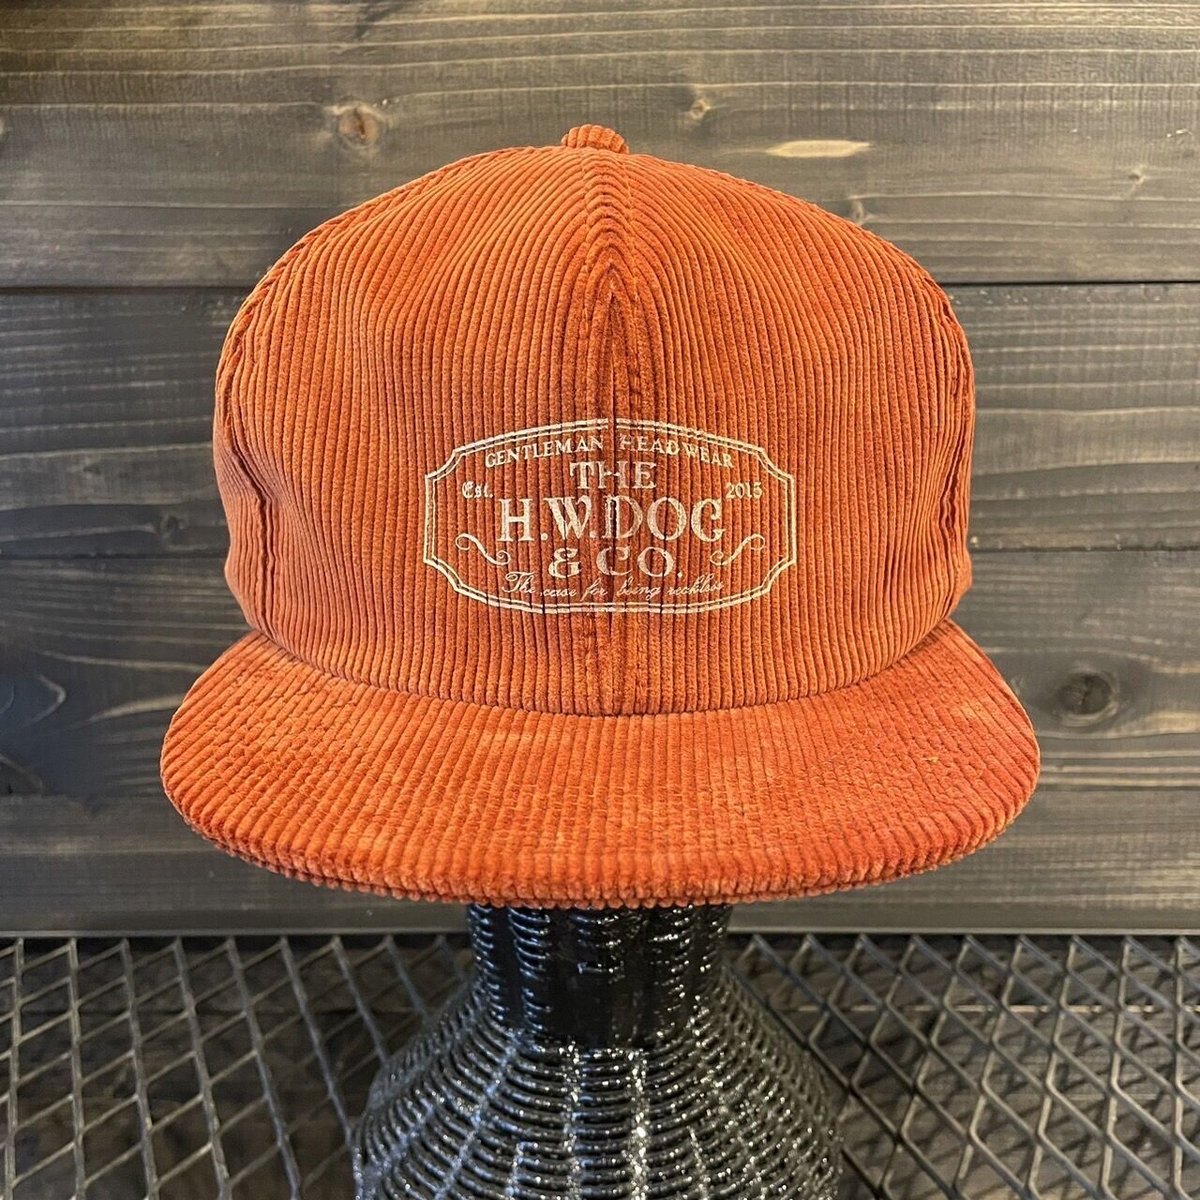 THE H.W.DOG &CO. TRUCKER CAP-C | STYLE FACTORY